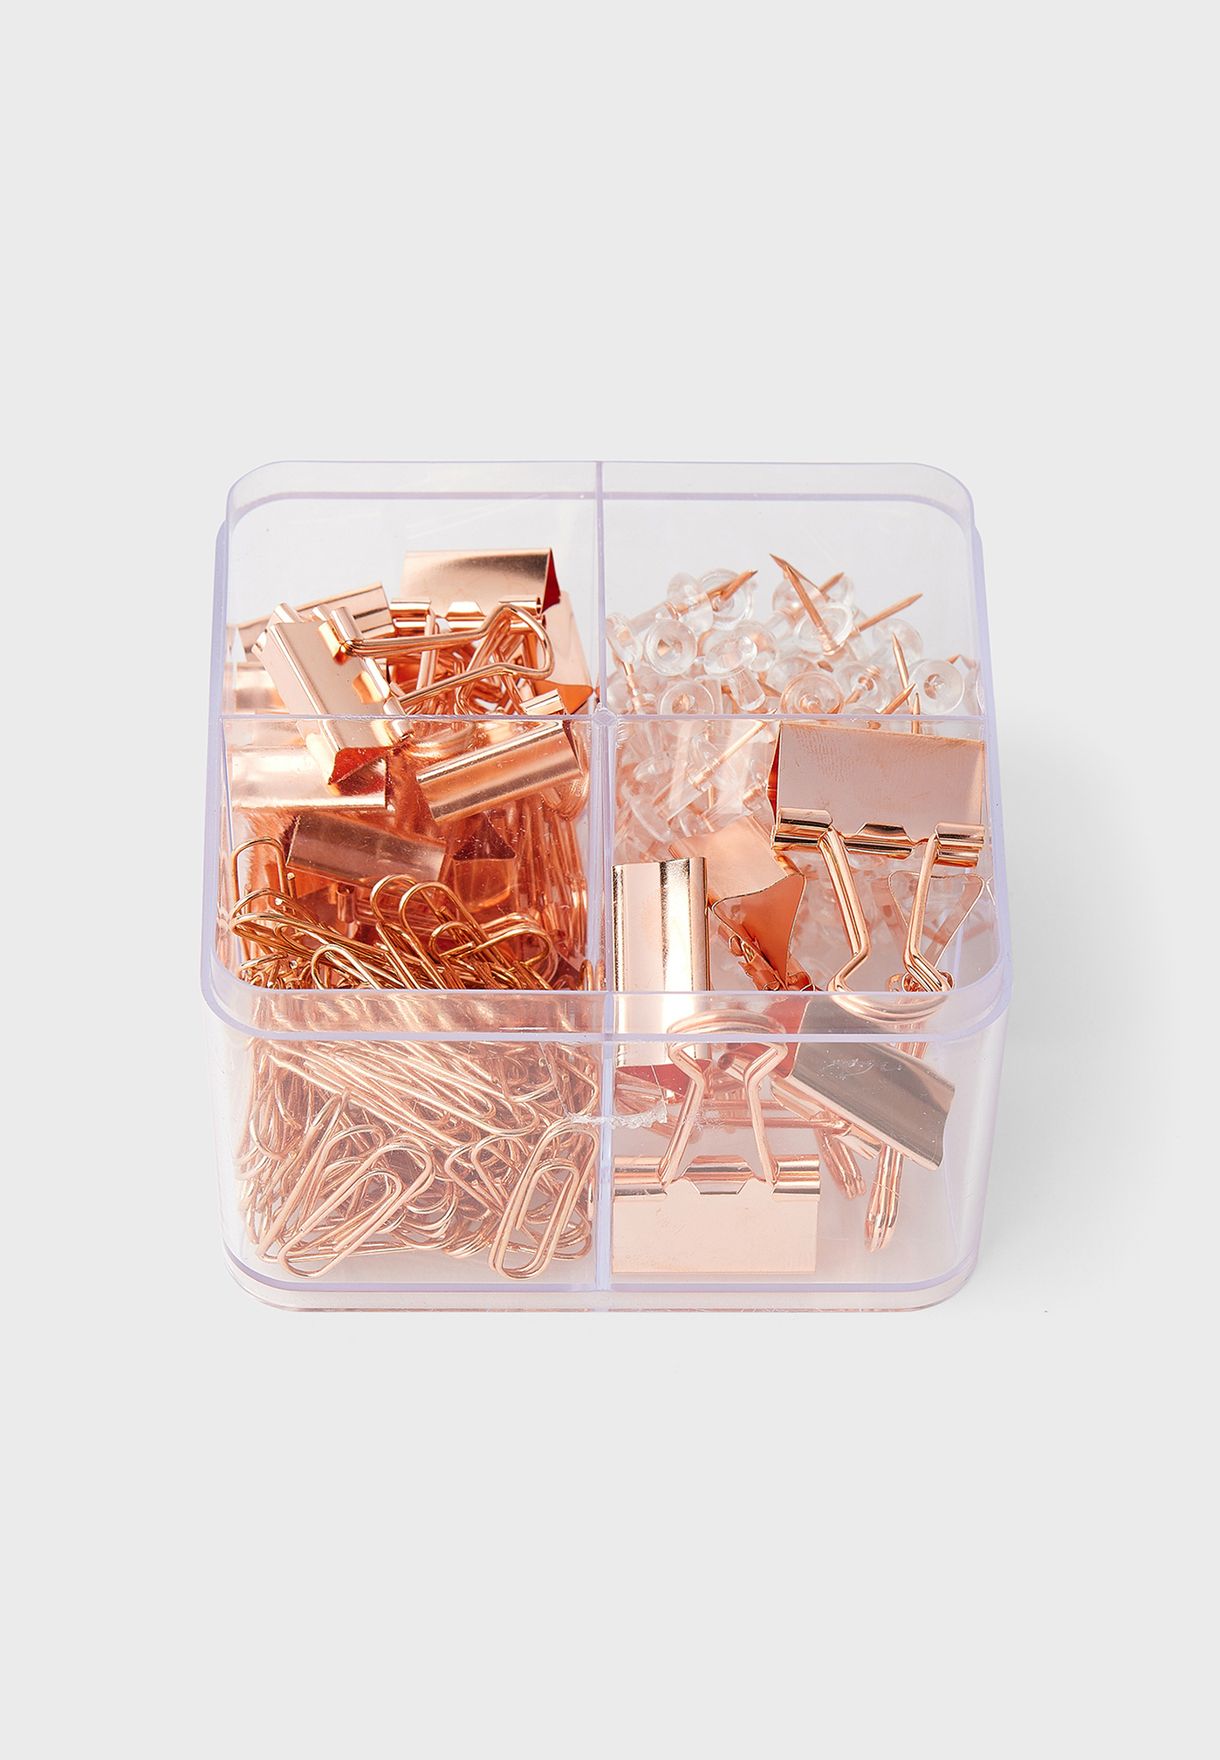 Rose Gold 'Hooked' Paperclips, Pins & Clips Set